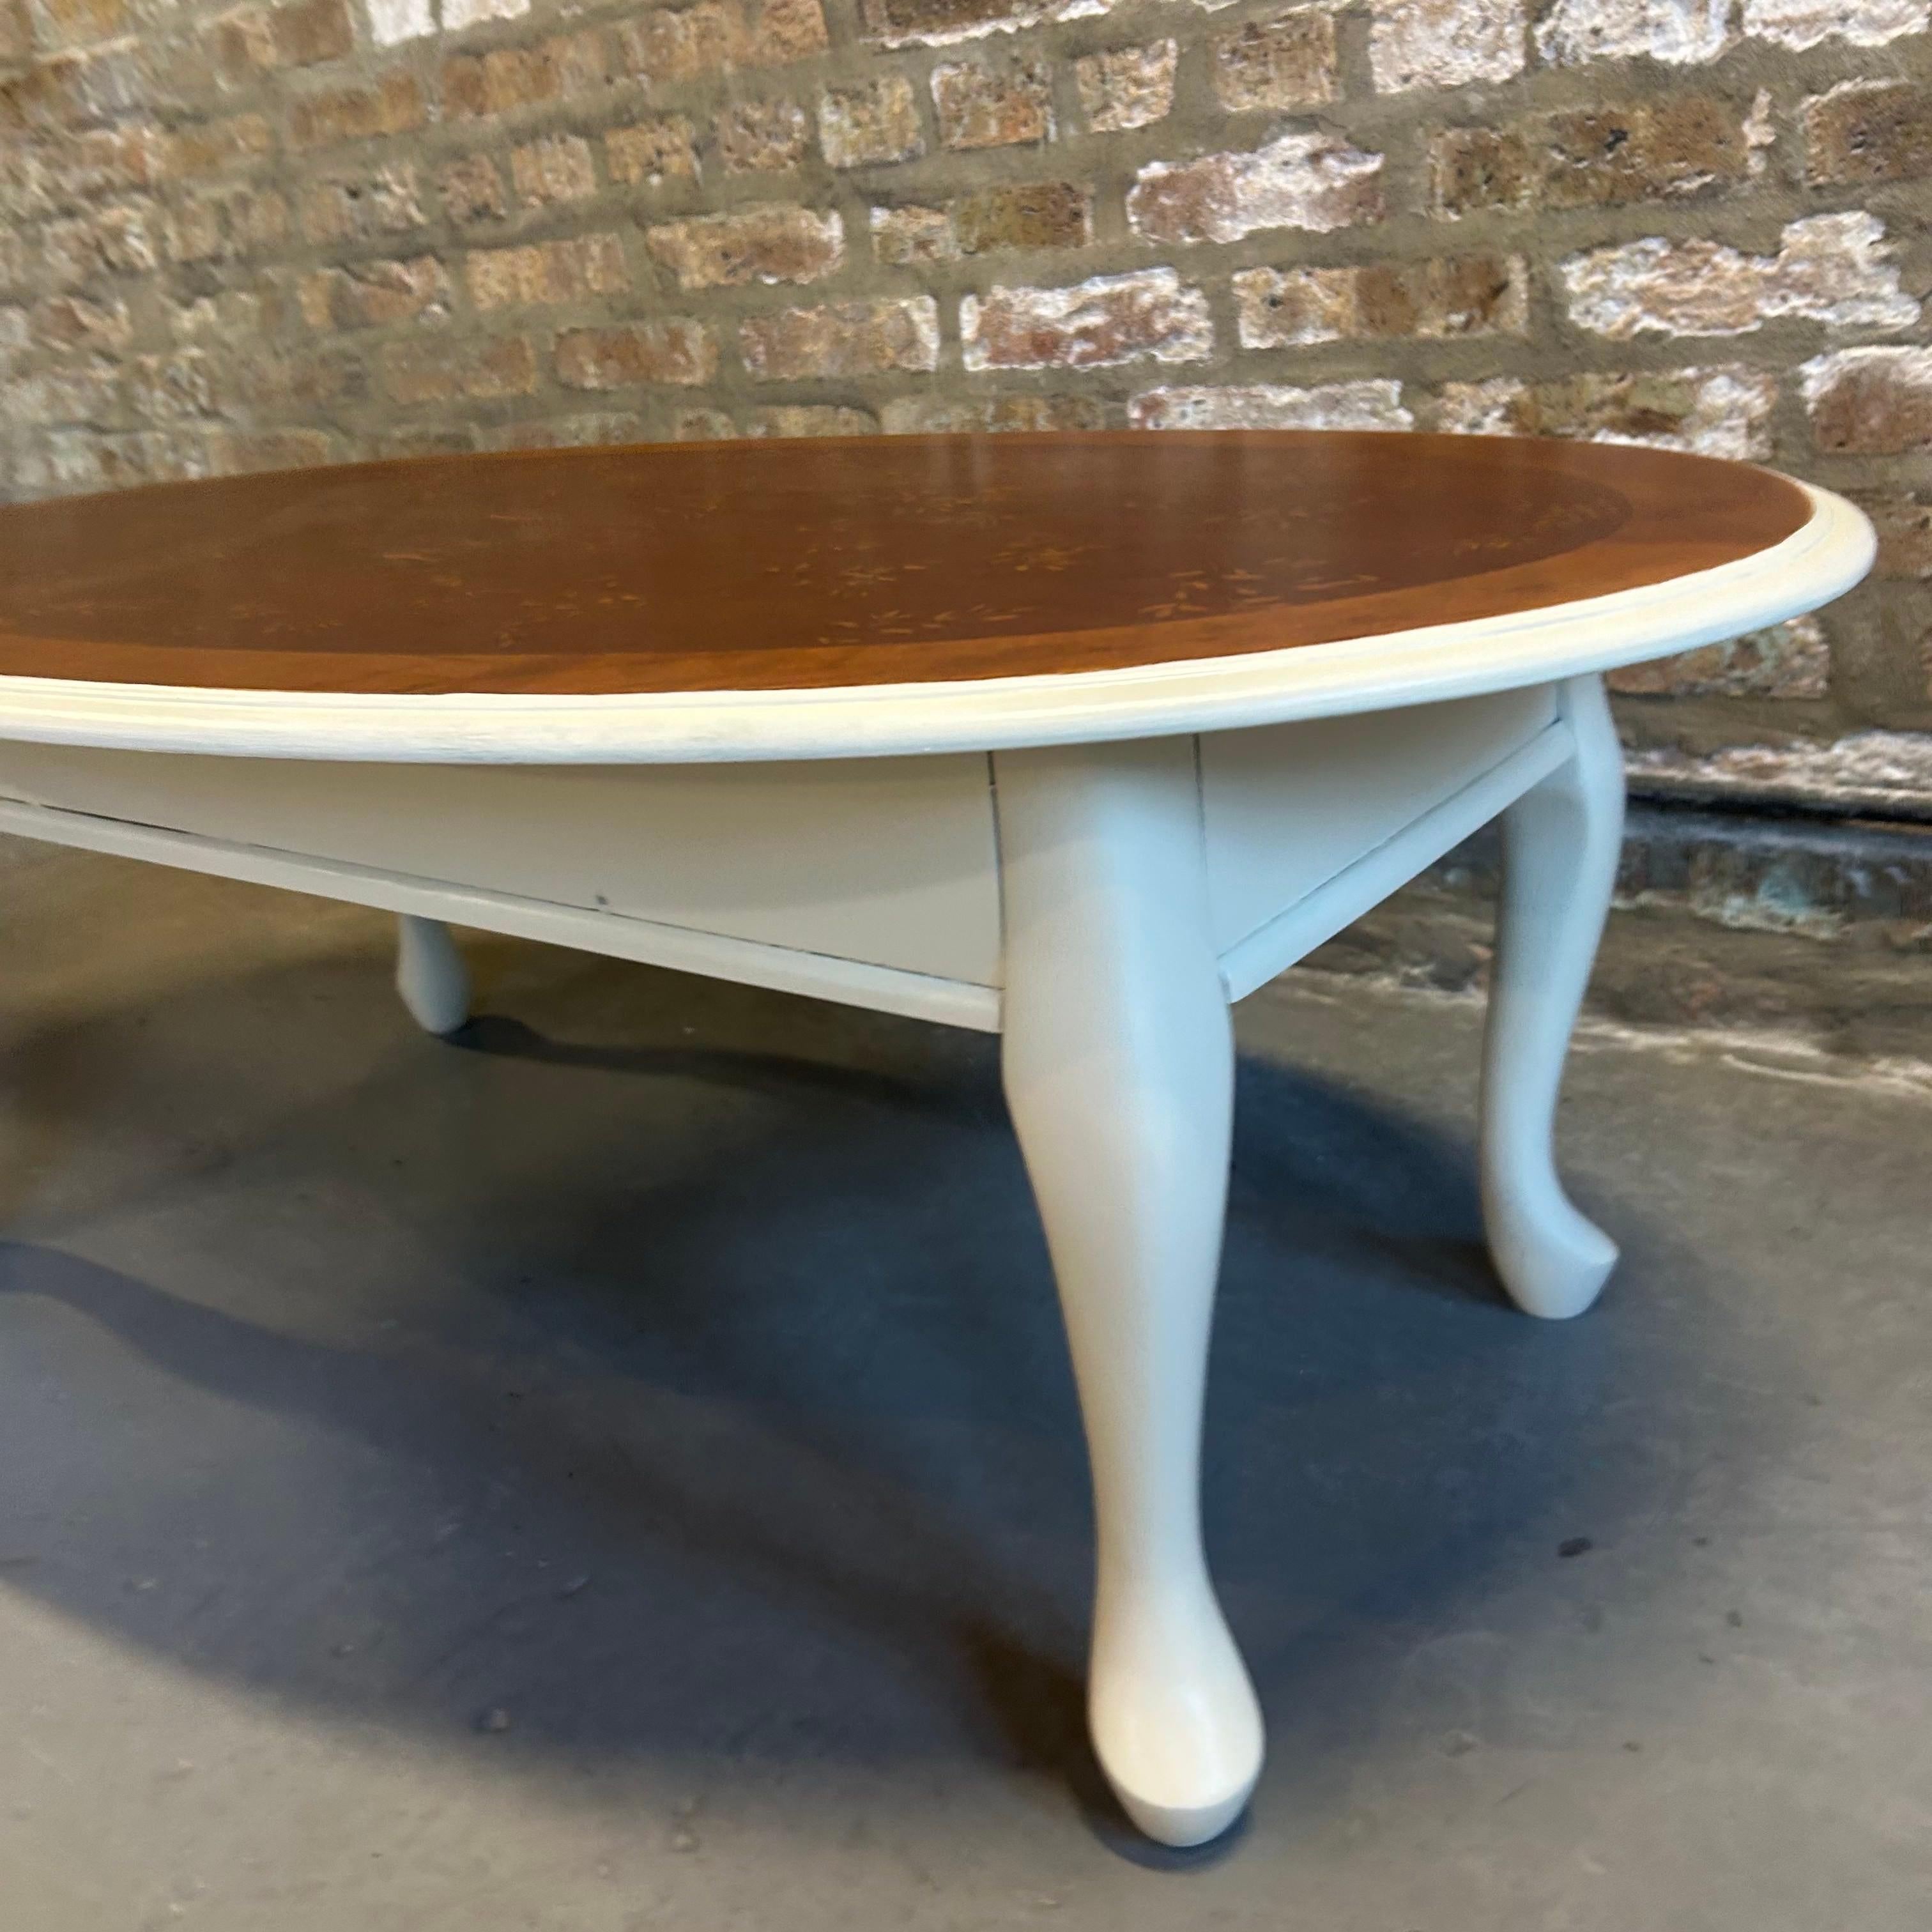 Painted Vintage Oval Coffee Table - Natural and White Botanical Theme For Sale